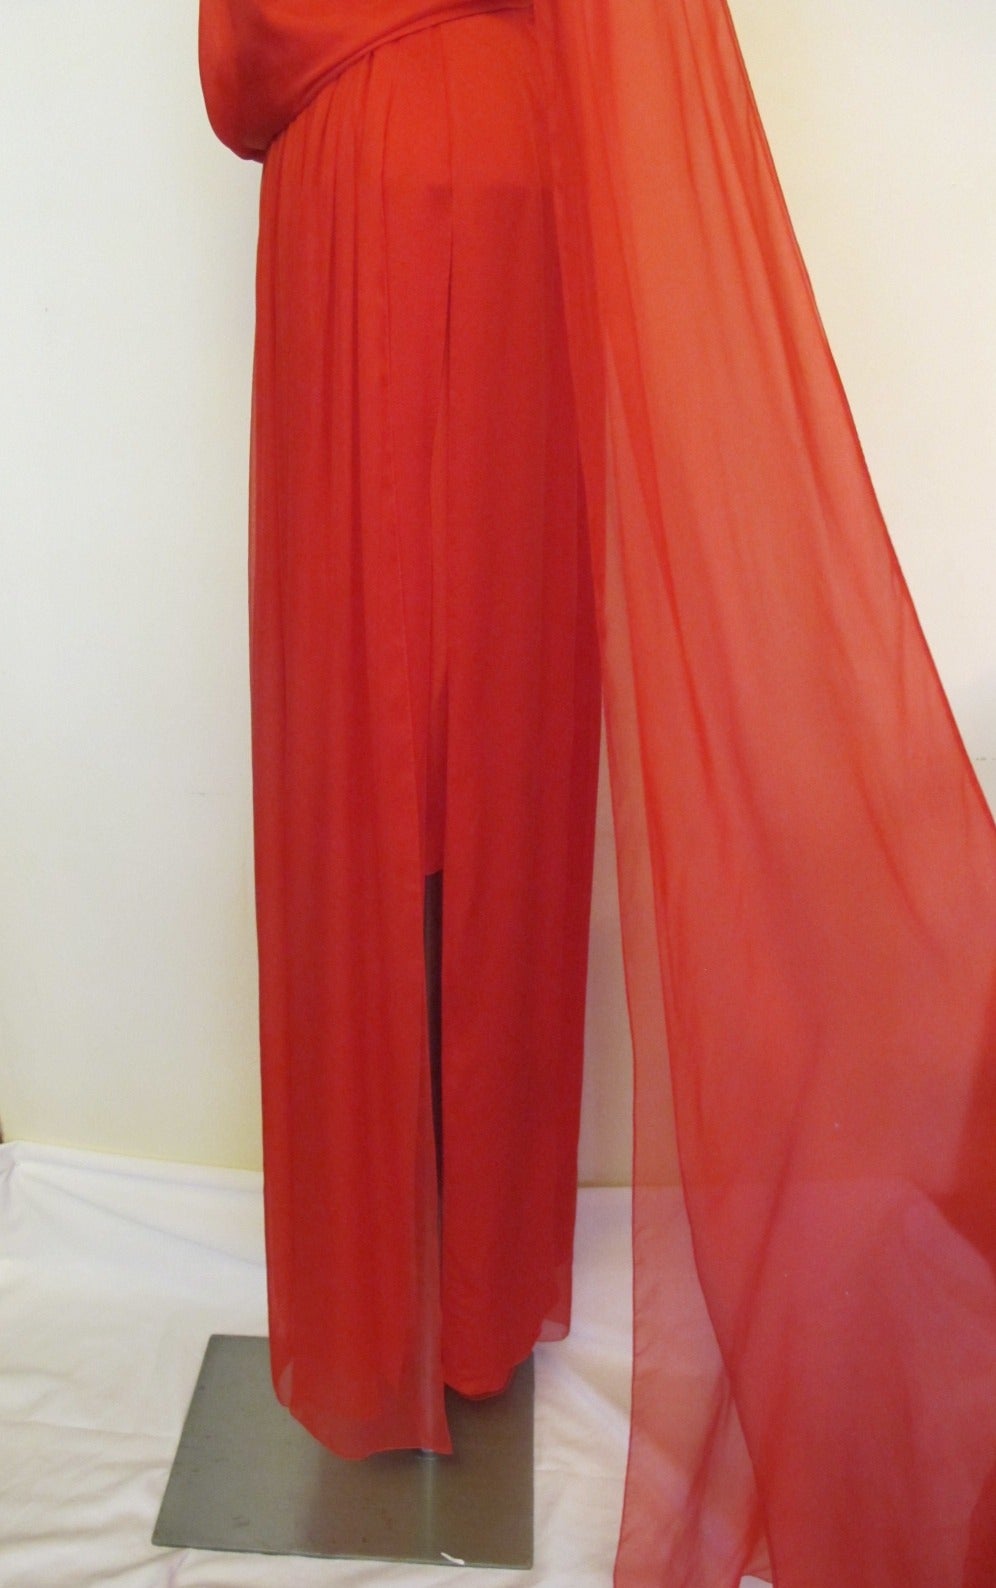 Tom Ford 2014 Red Silk Chiffon Evening Gown For Sale 2